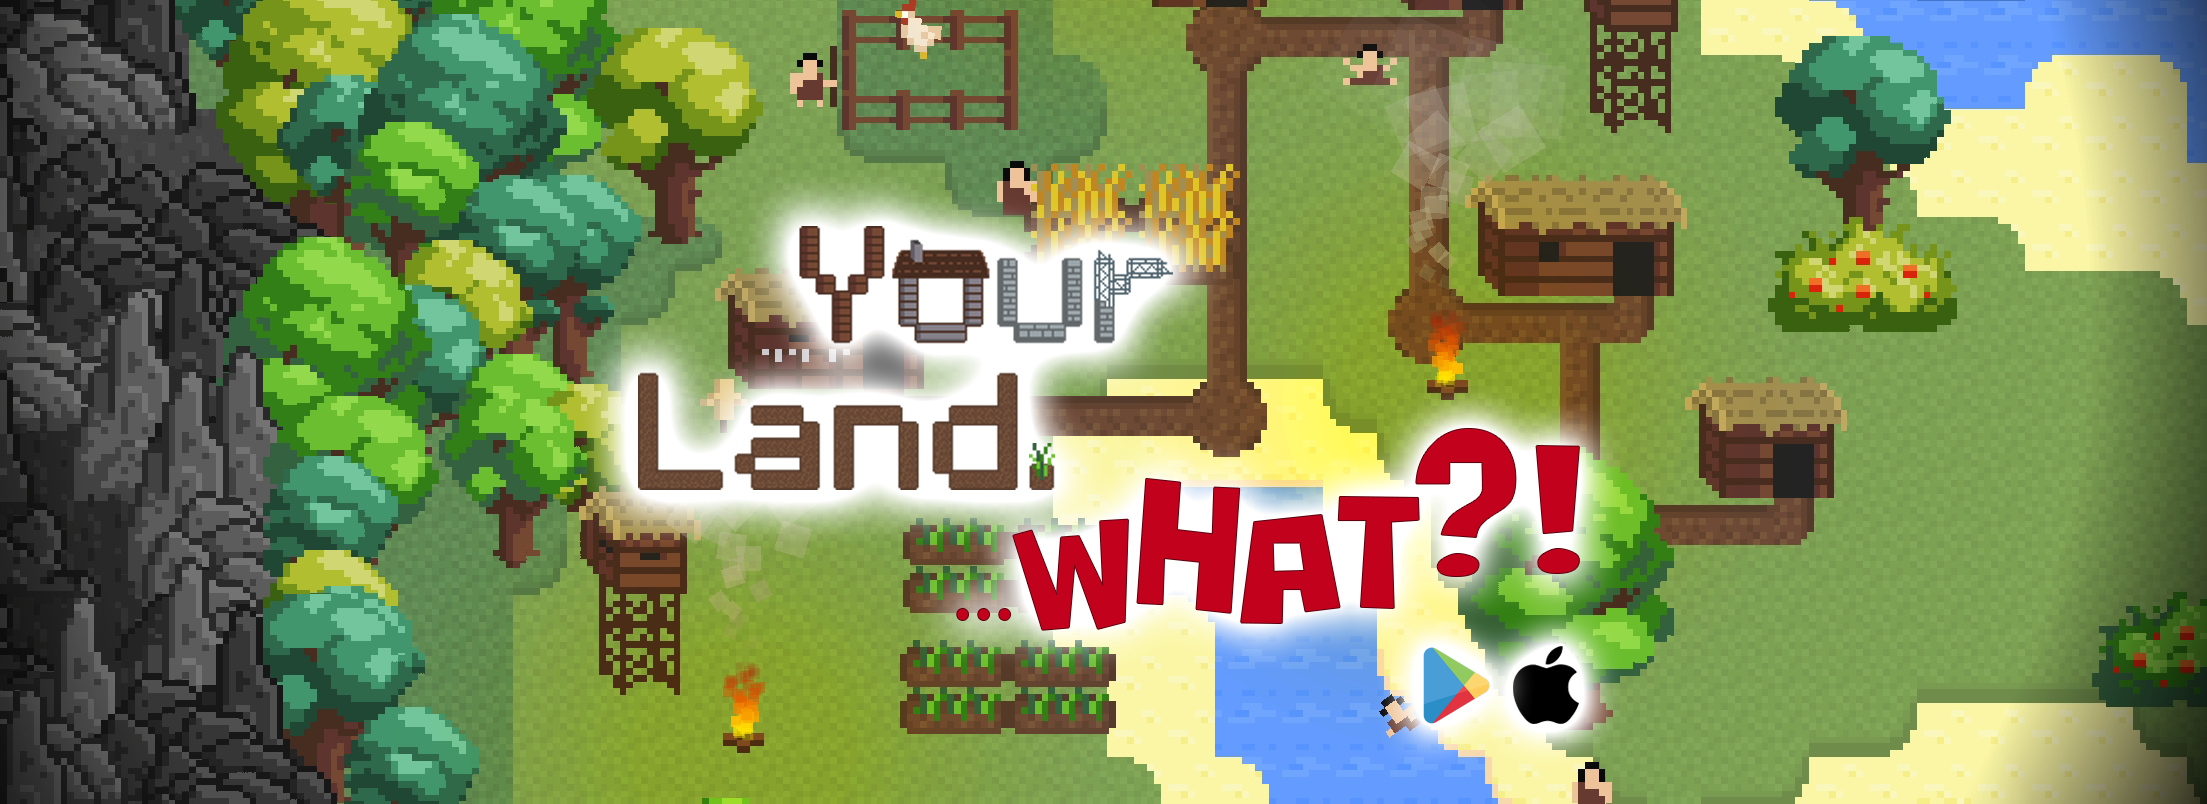 Your Land. WHAT?!